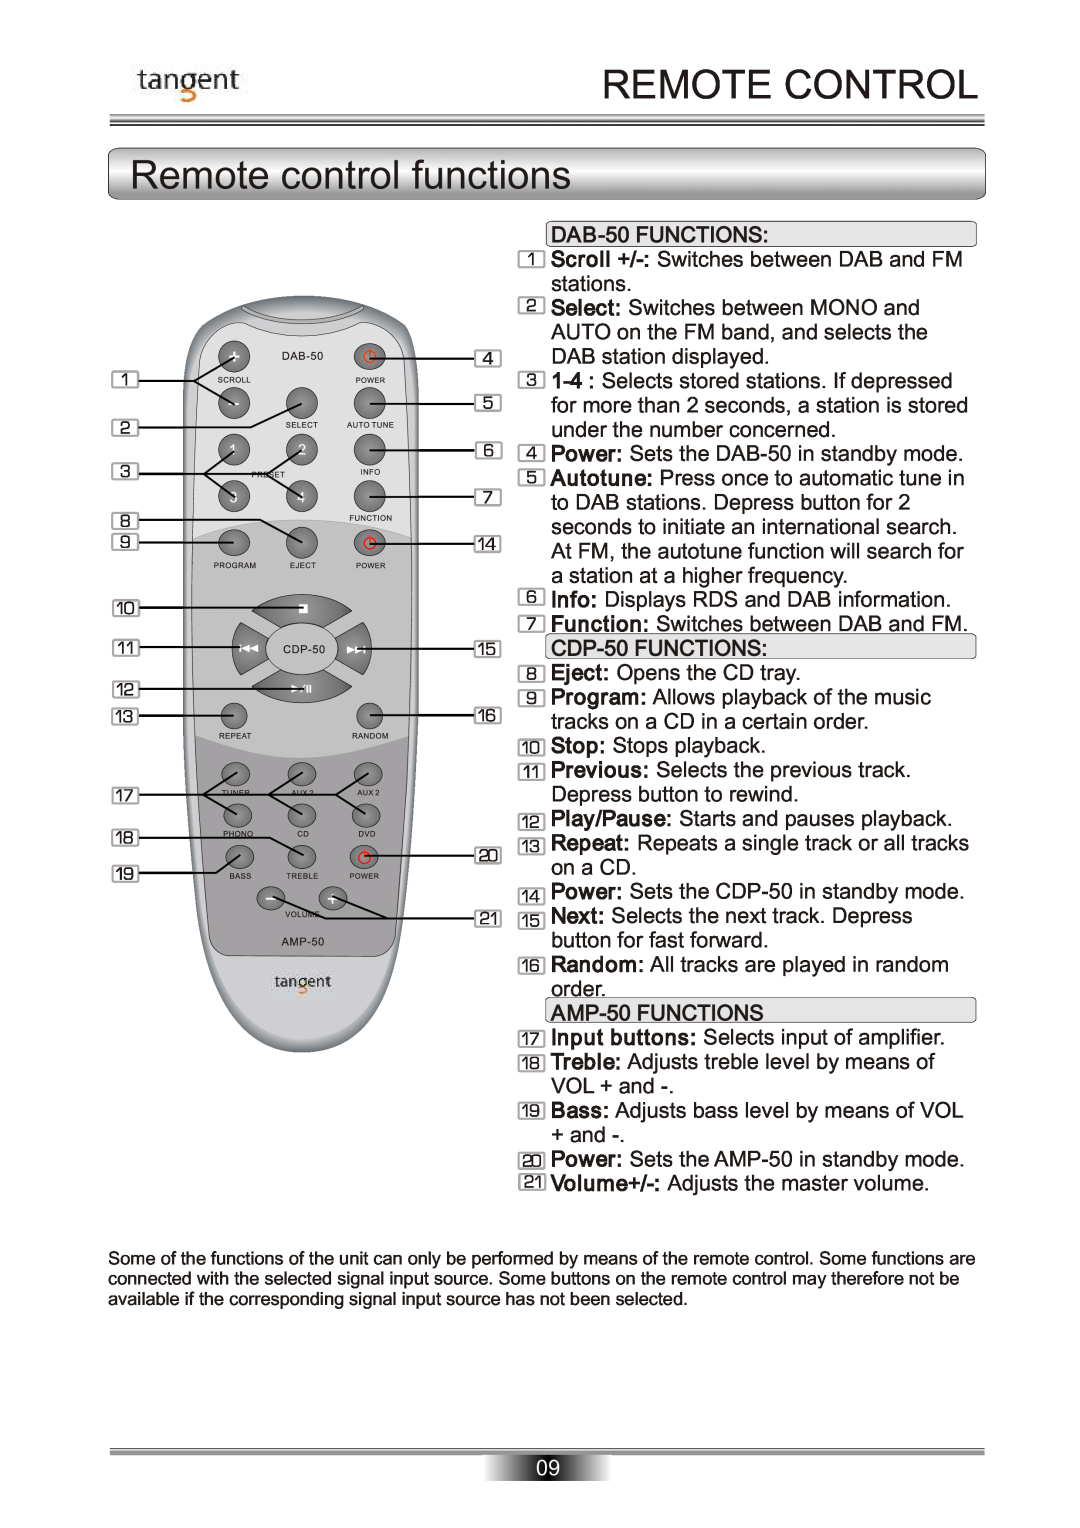 Tangent operation manual REMOTE CONTROL Remote control functions, DAB-50FUNCTIONS, CDP-50FUNCTIONS, AMP-50FUNCTIONS 